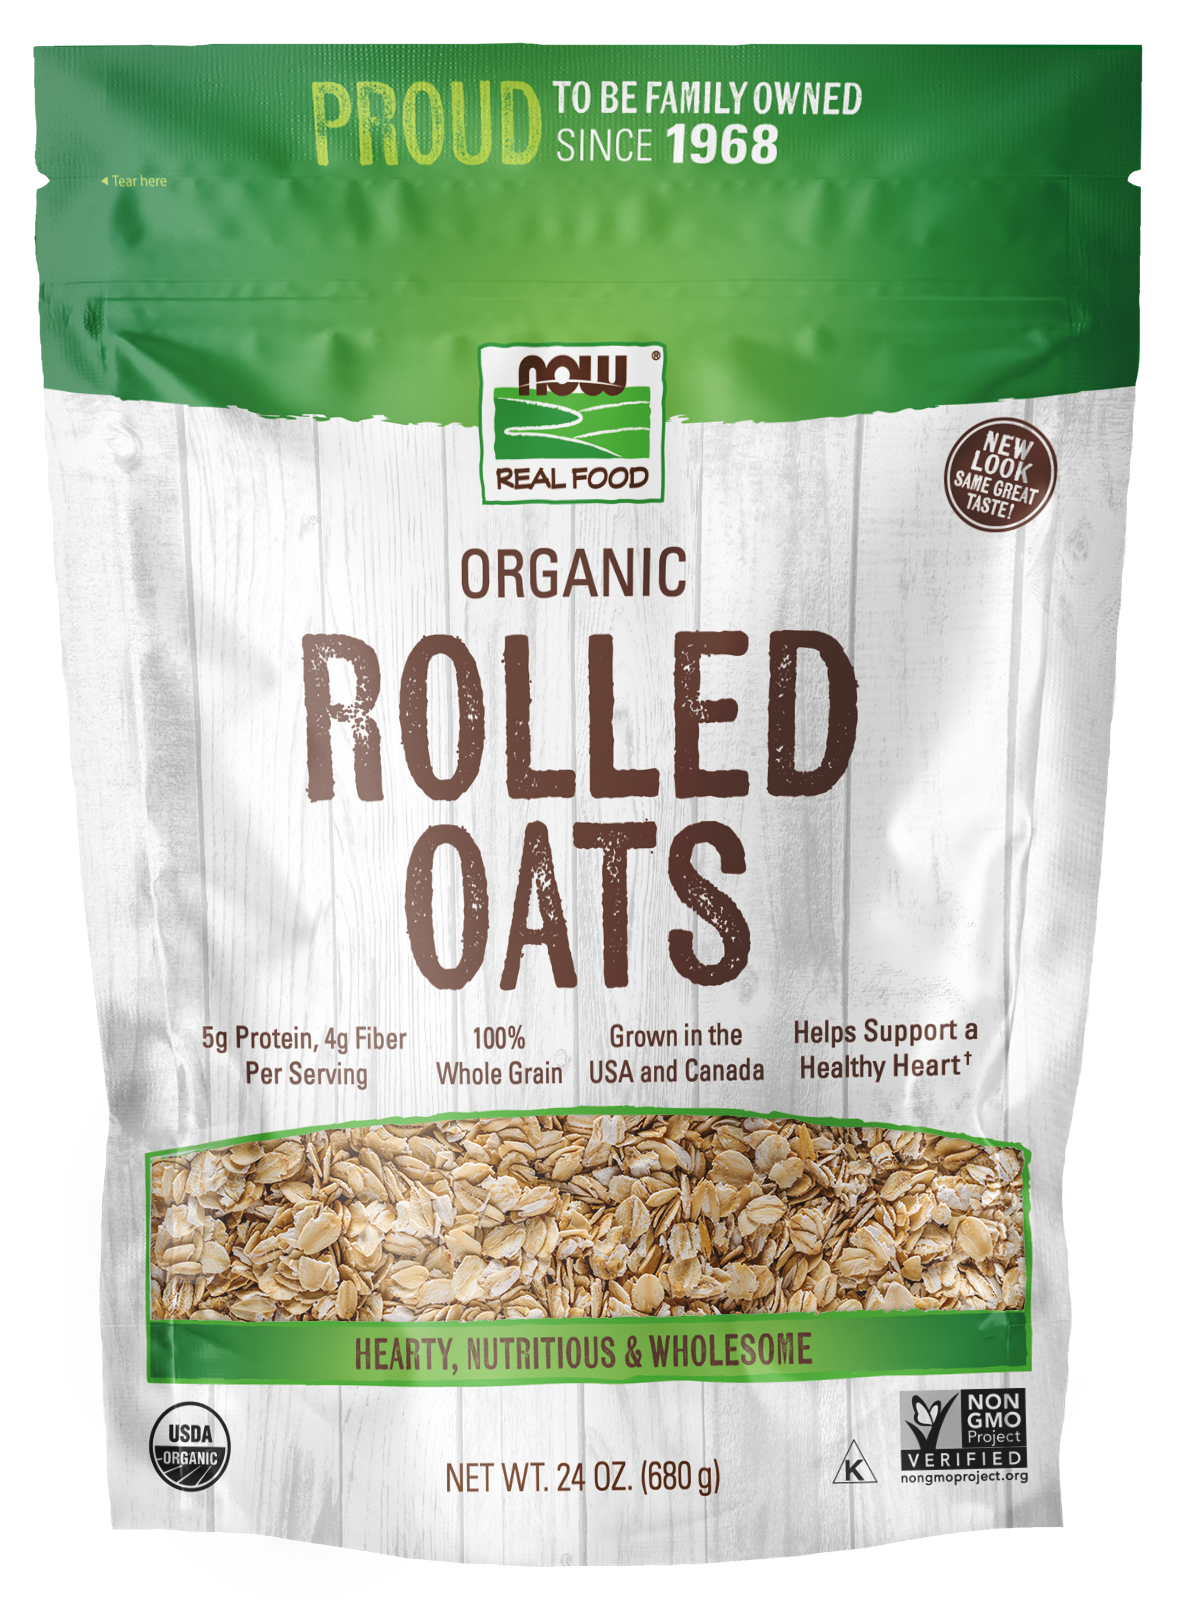 Pouch of Rolled Oats, Organic - 24 oz. Bag Front